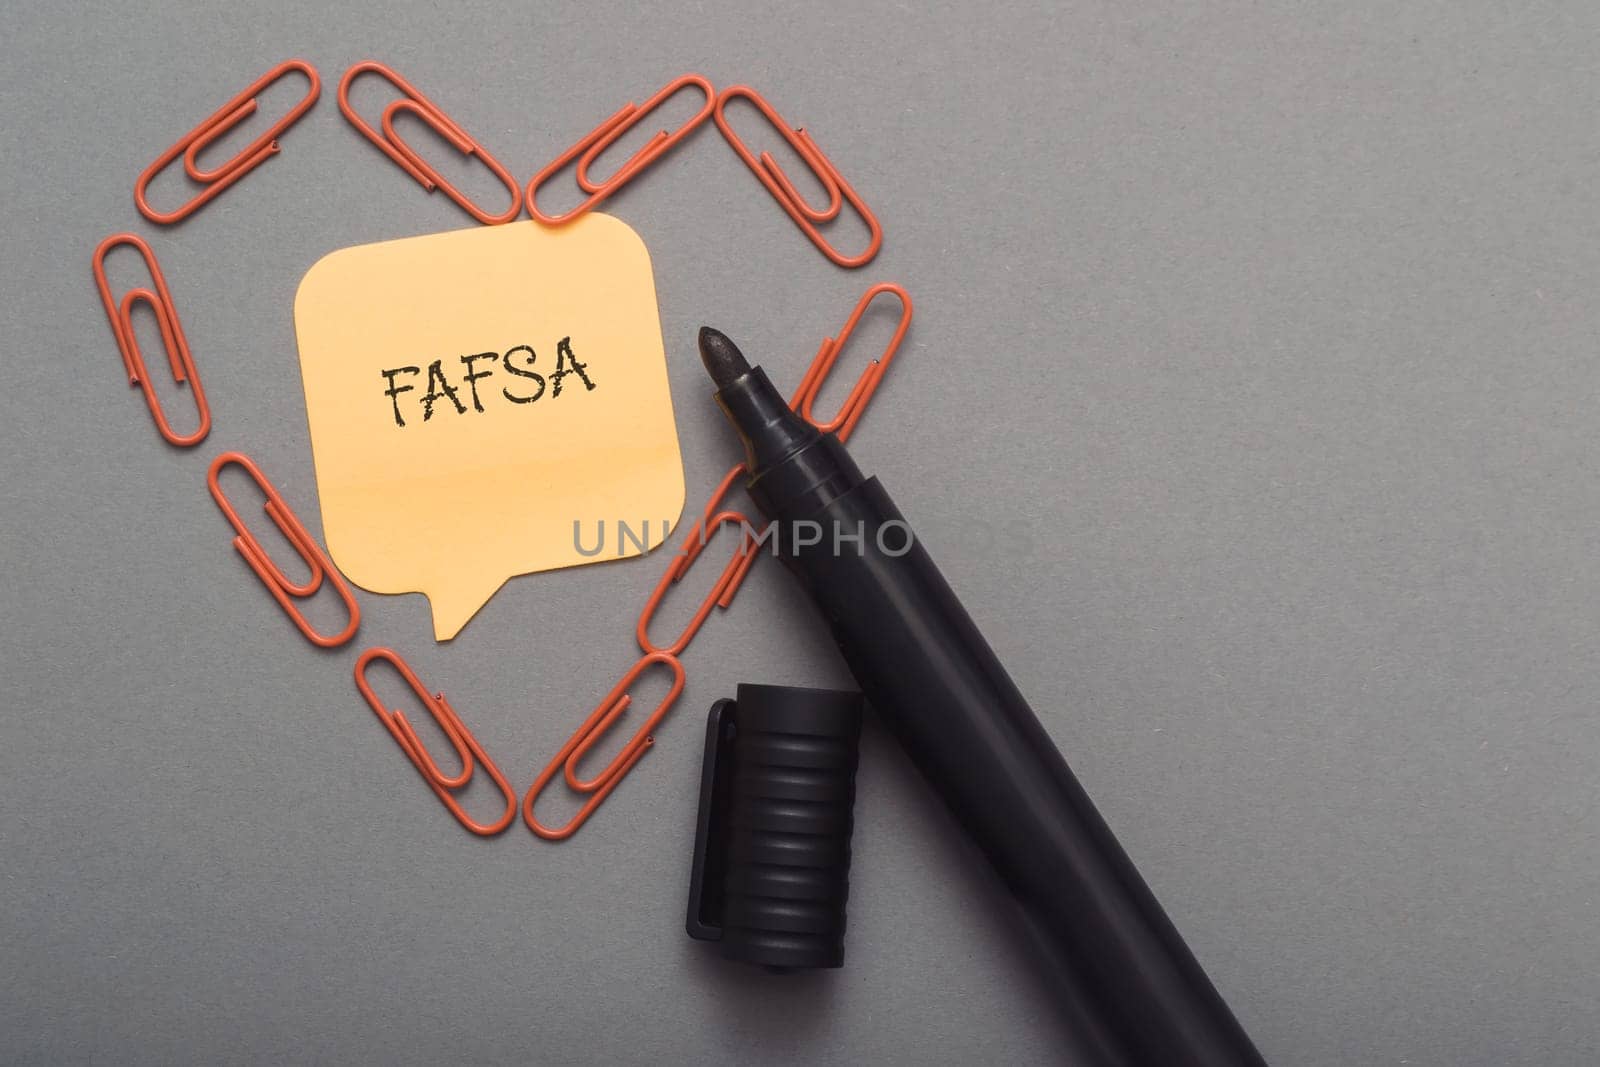 A pen with a piece of paper with the word FAFSA written on it. The pen is surrounded by paper clips, creating a heart shape